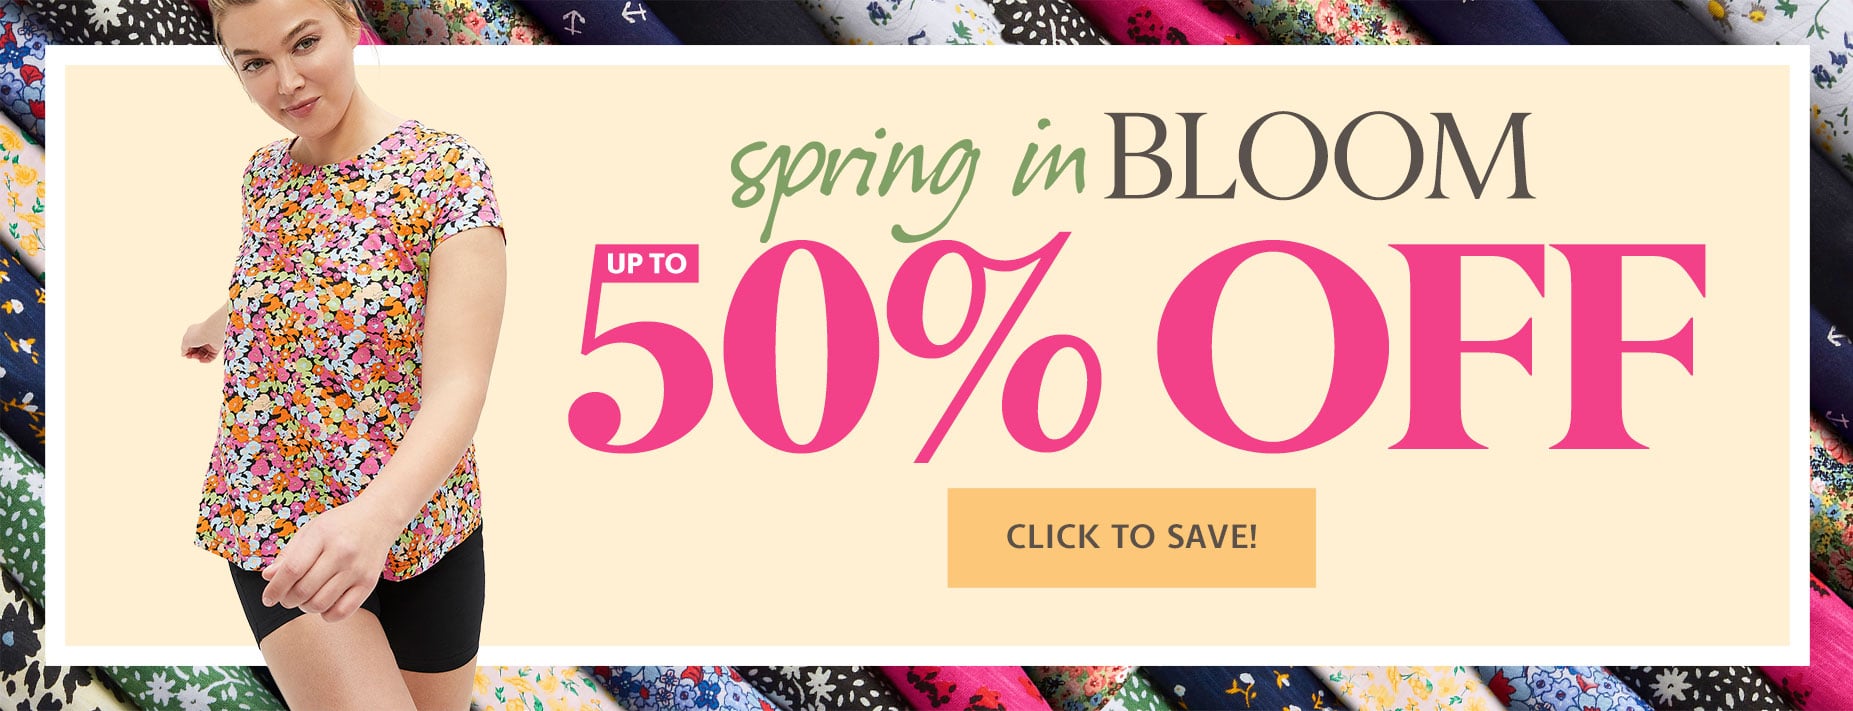 Up to 50% Off - Spring in Bloom